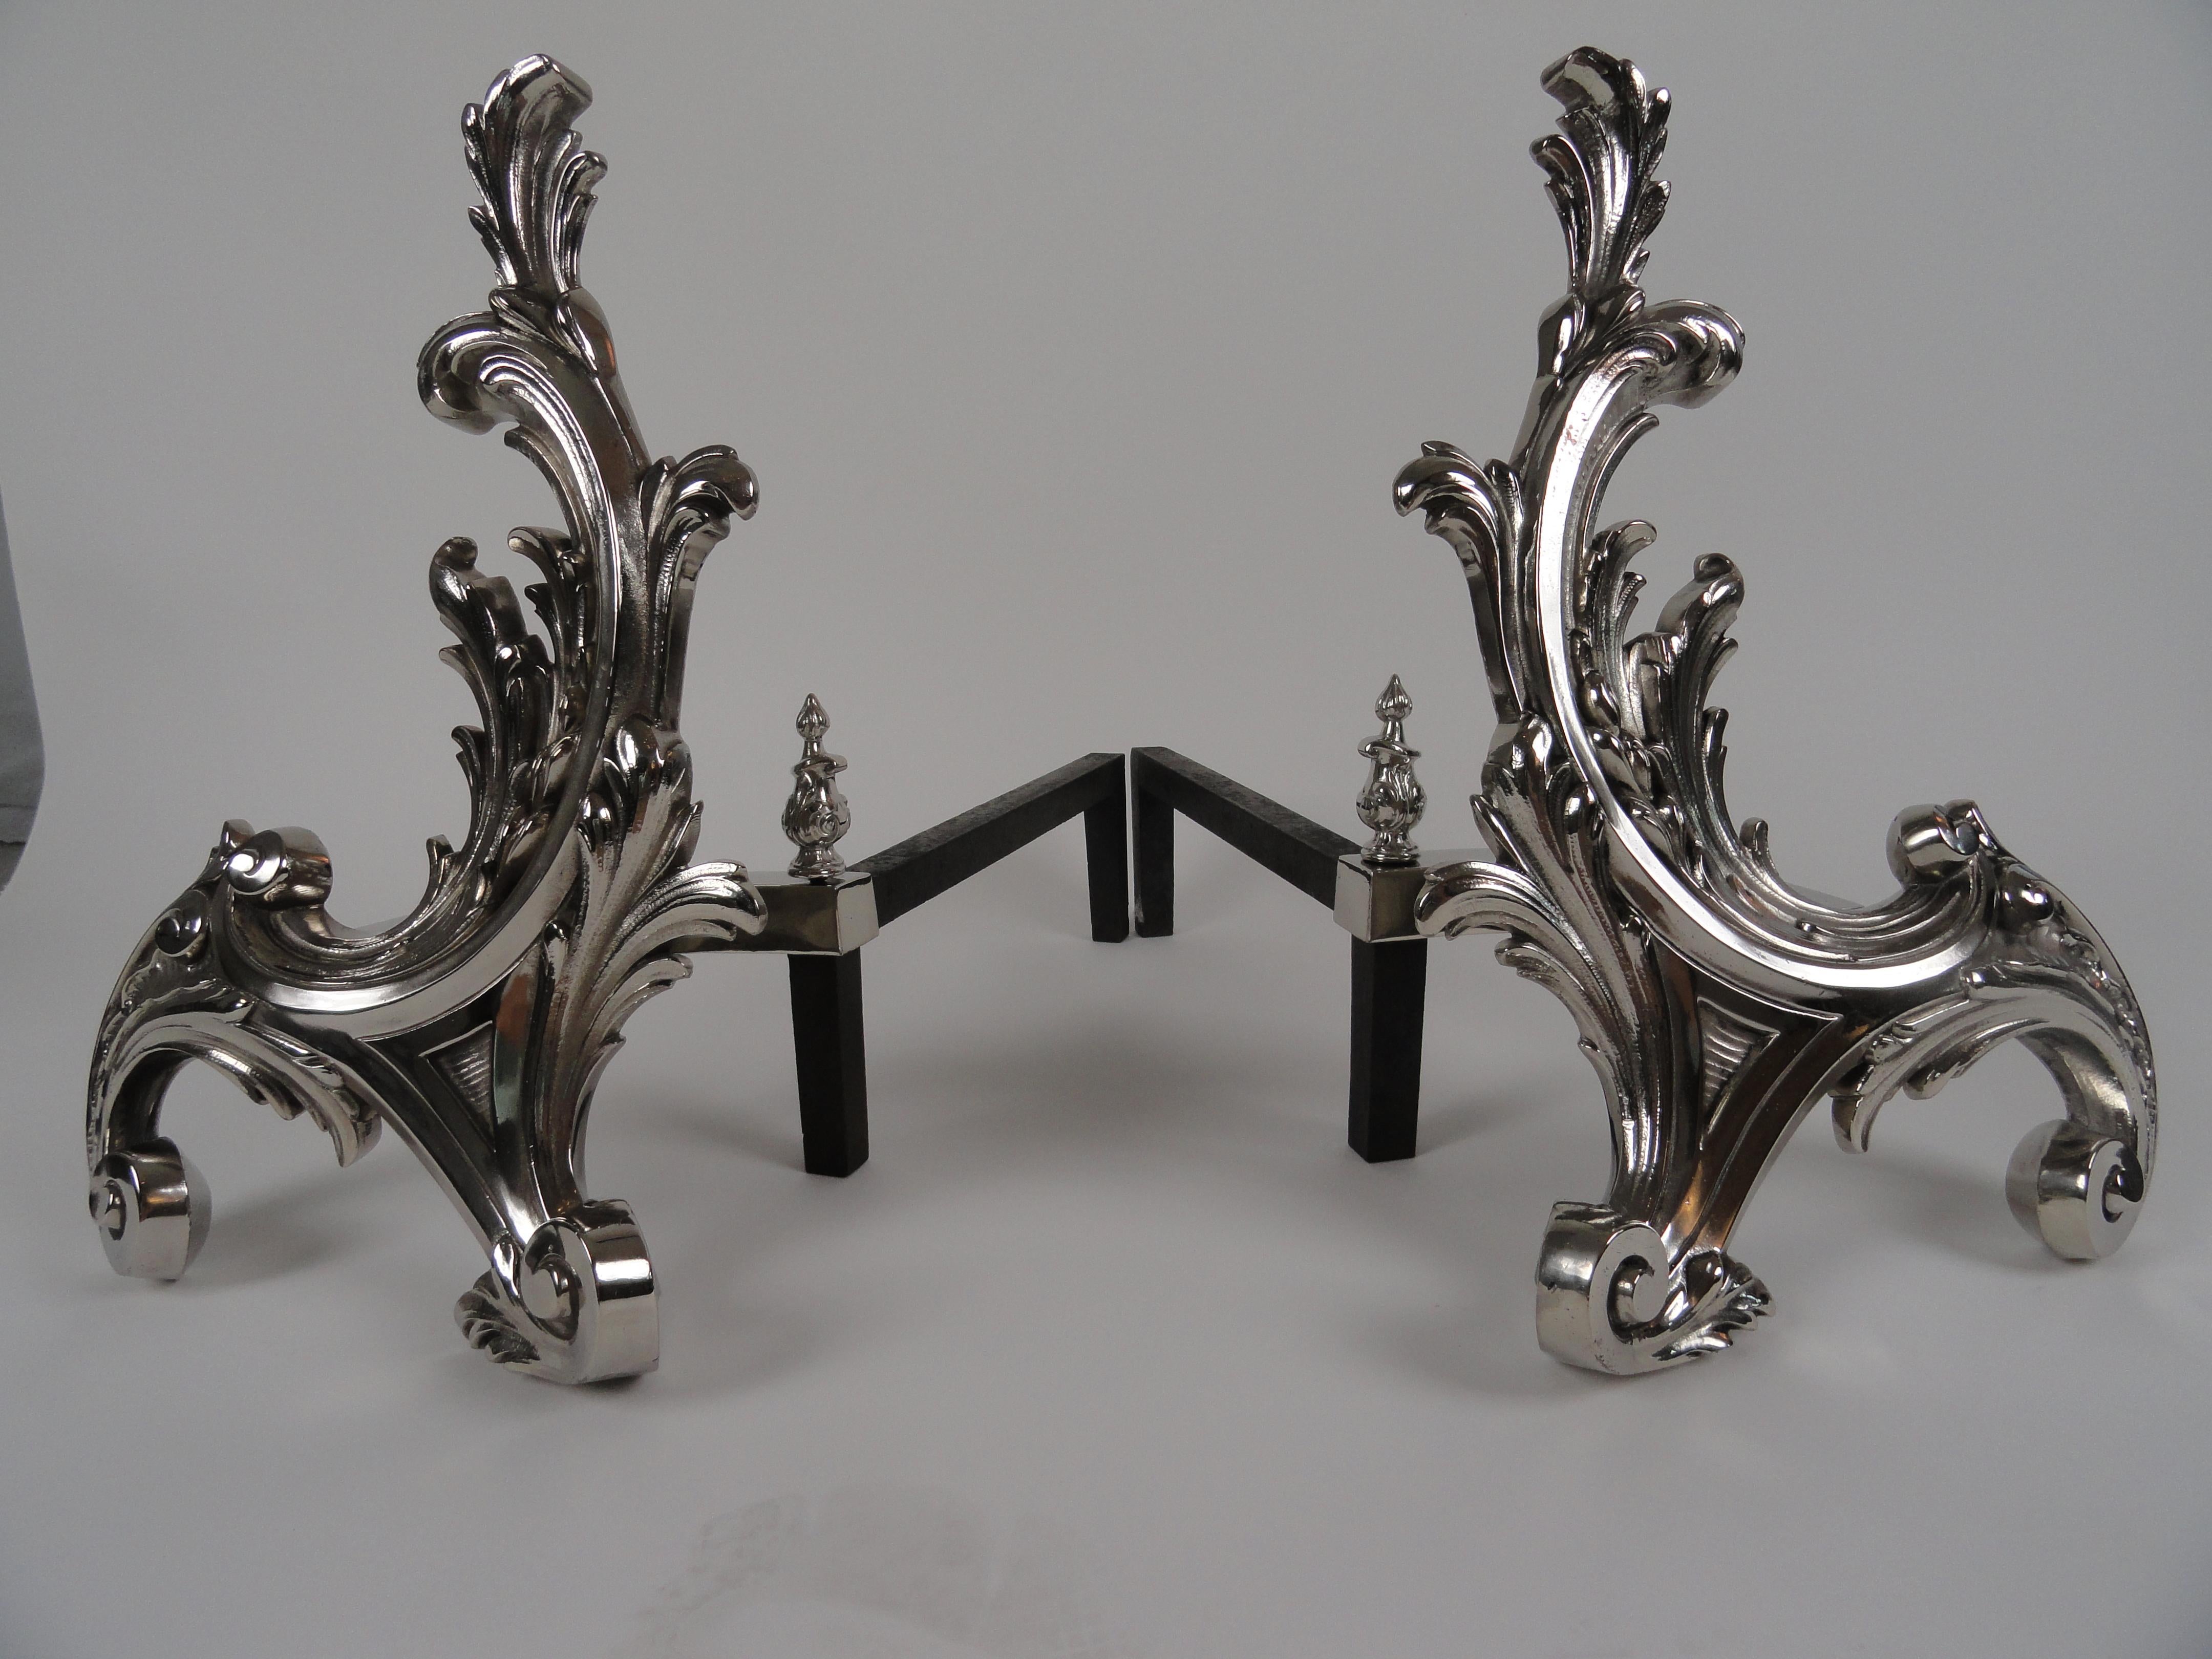 Pair of French 19th century Rococo style chenets. Brass andirons with polished nickel finish. Imported from France by William Jackson of New York.